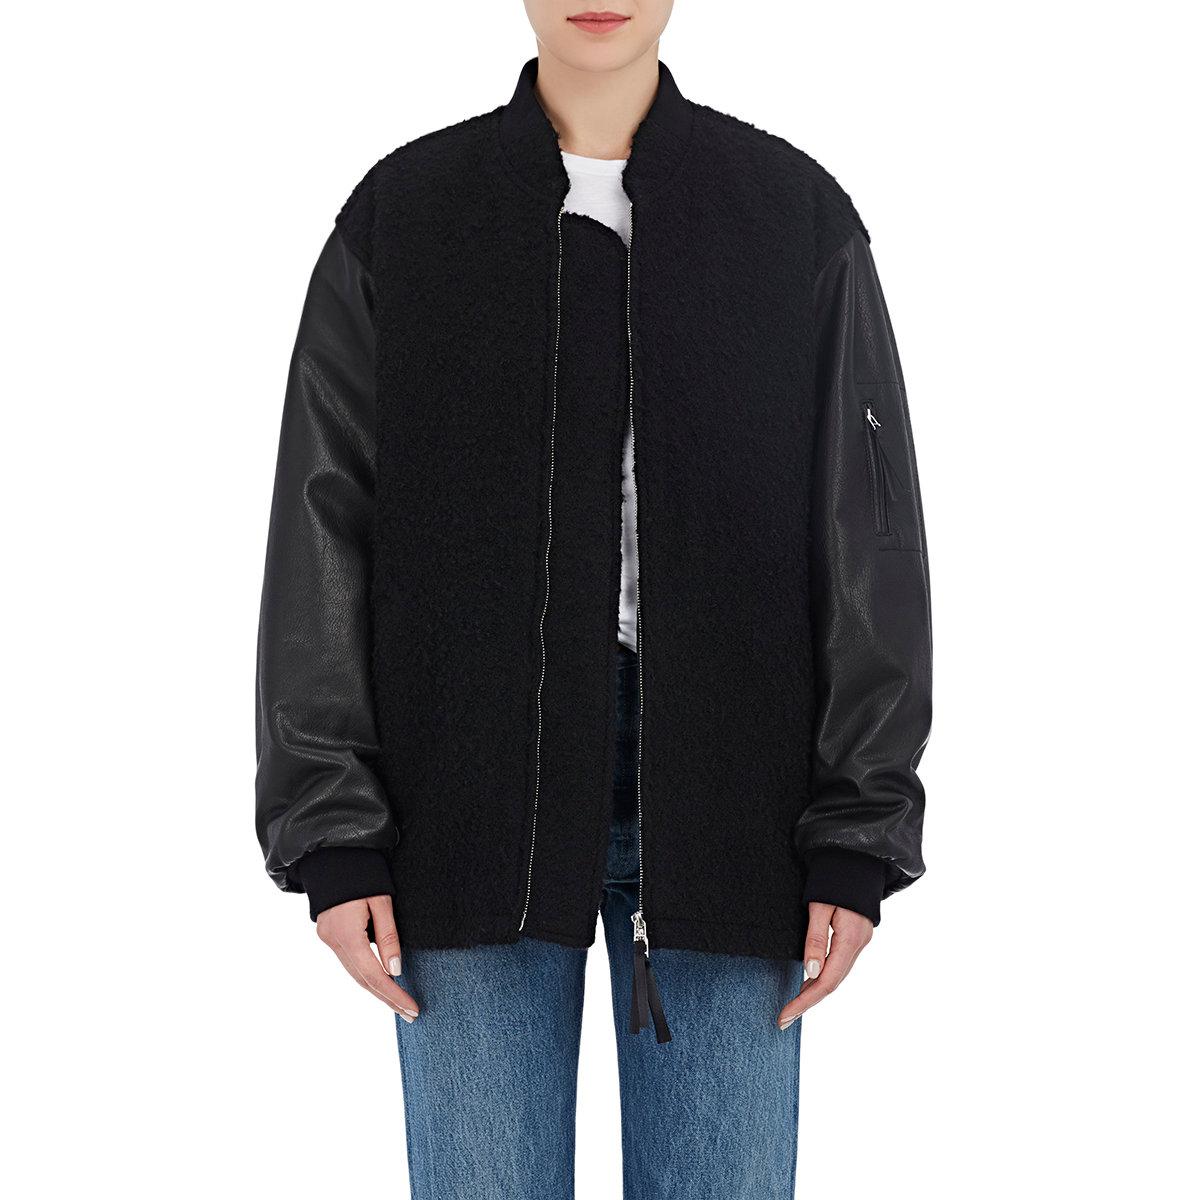 Lyst - T By Alexander Wang Bouclé & Leather Oversized Bomber Jacket in ...